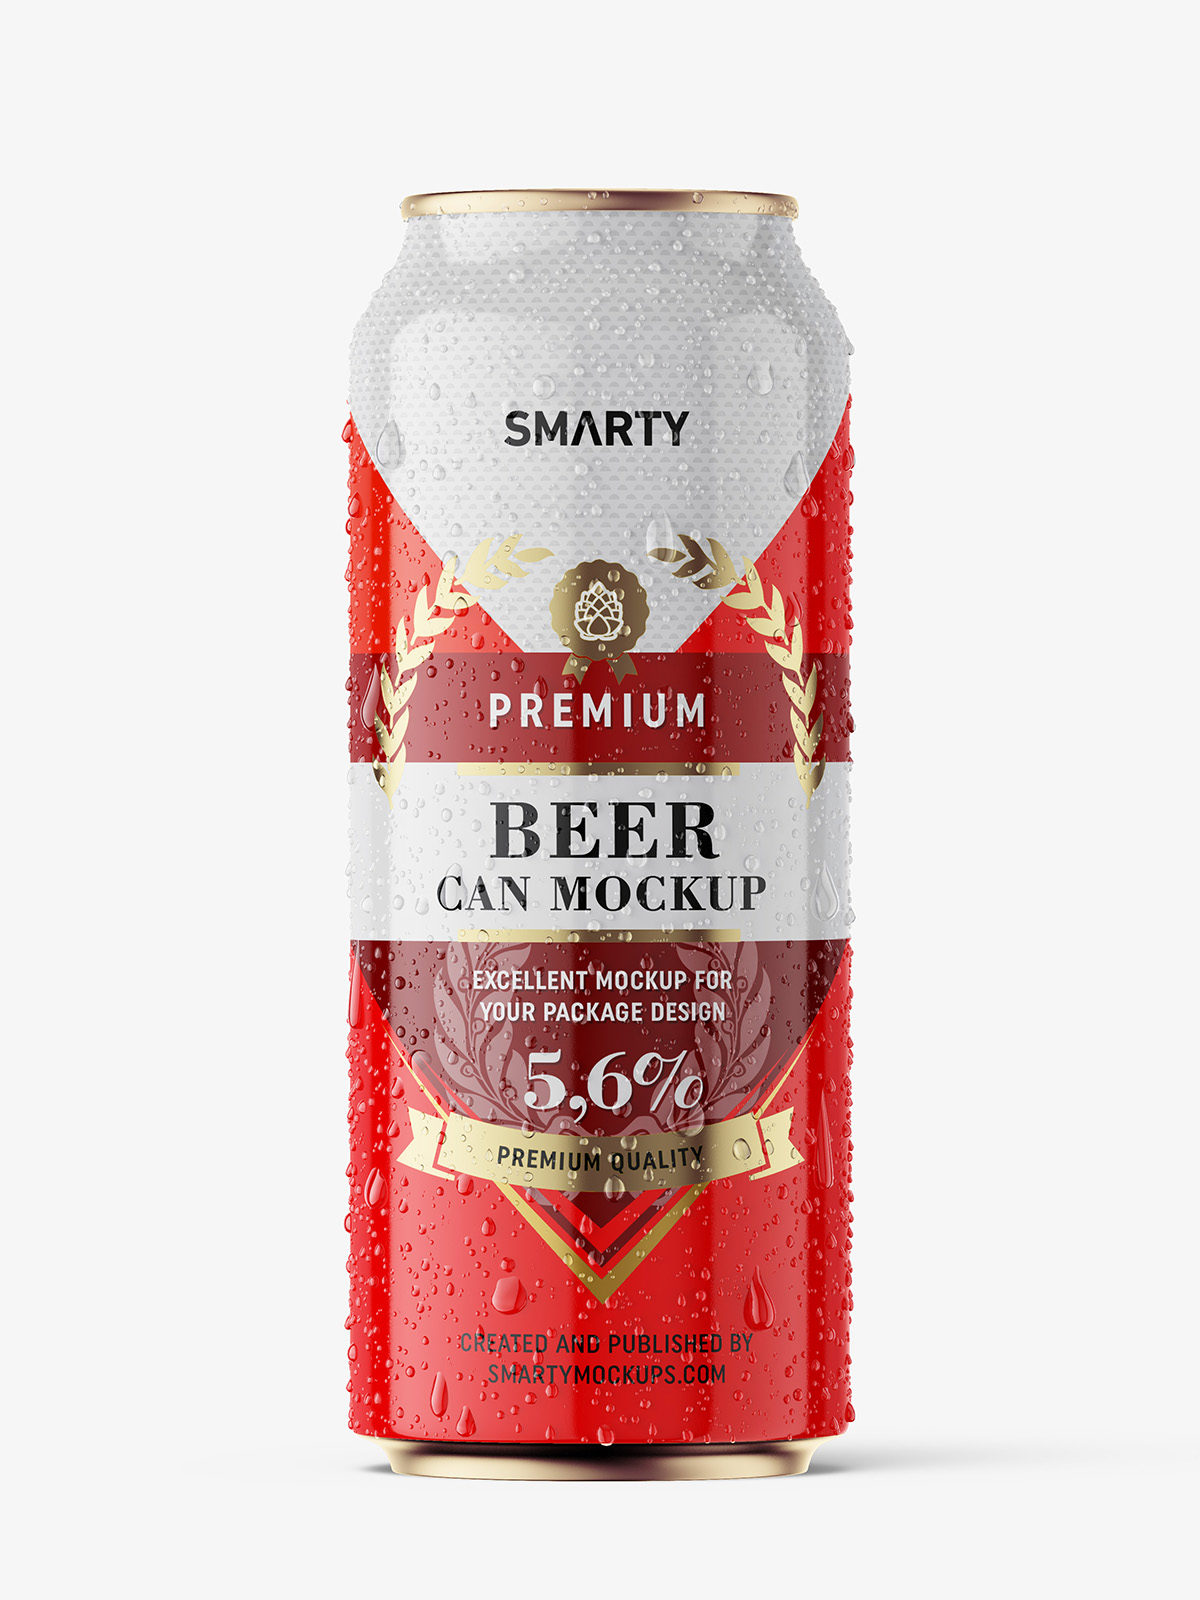 Glossy beer can with condensation mockup / 500 ml - Smarty Mockups